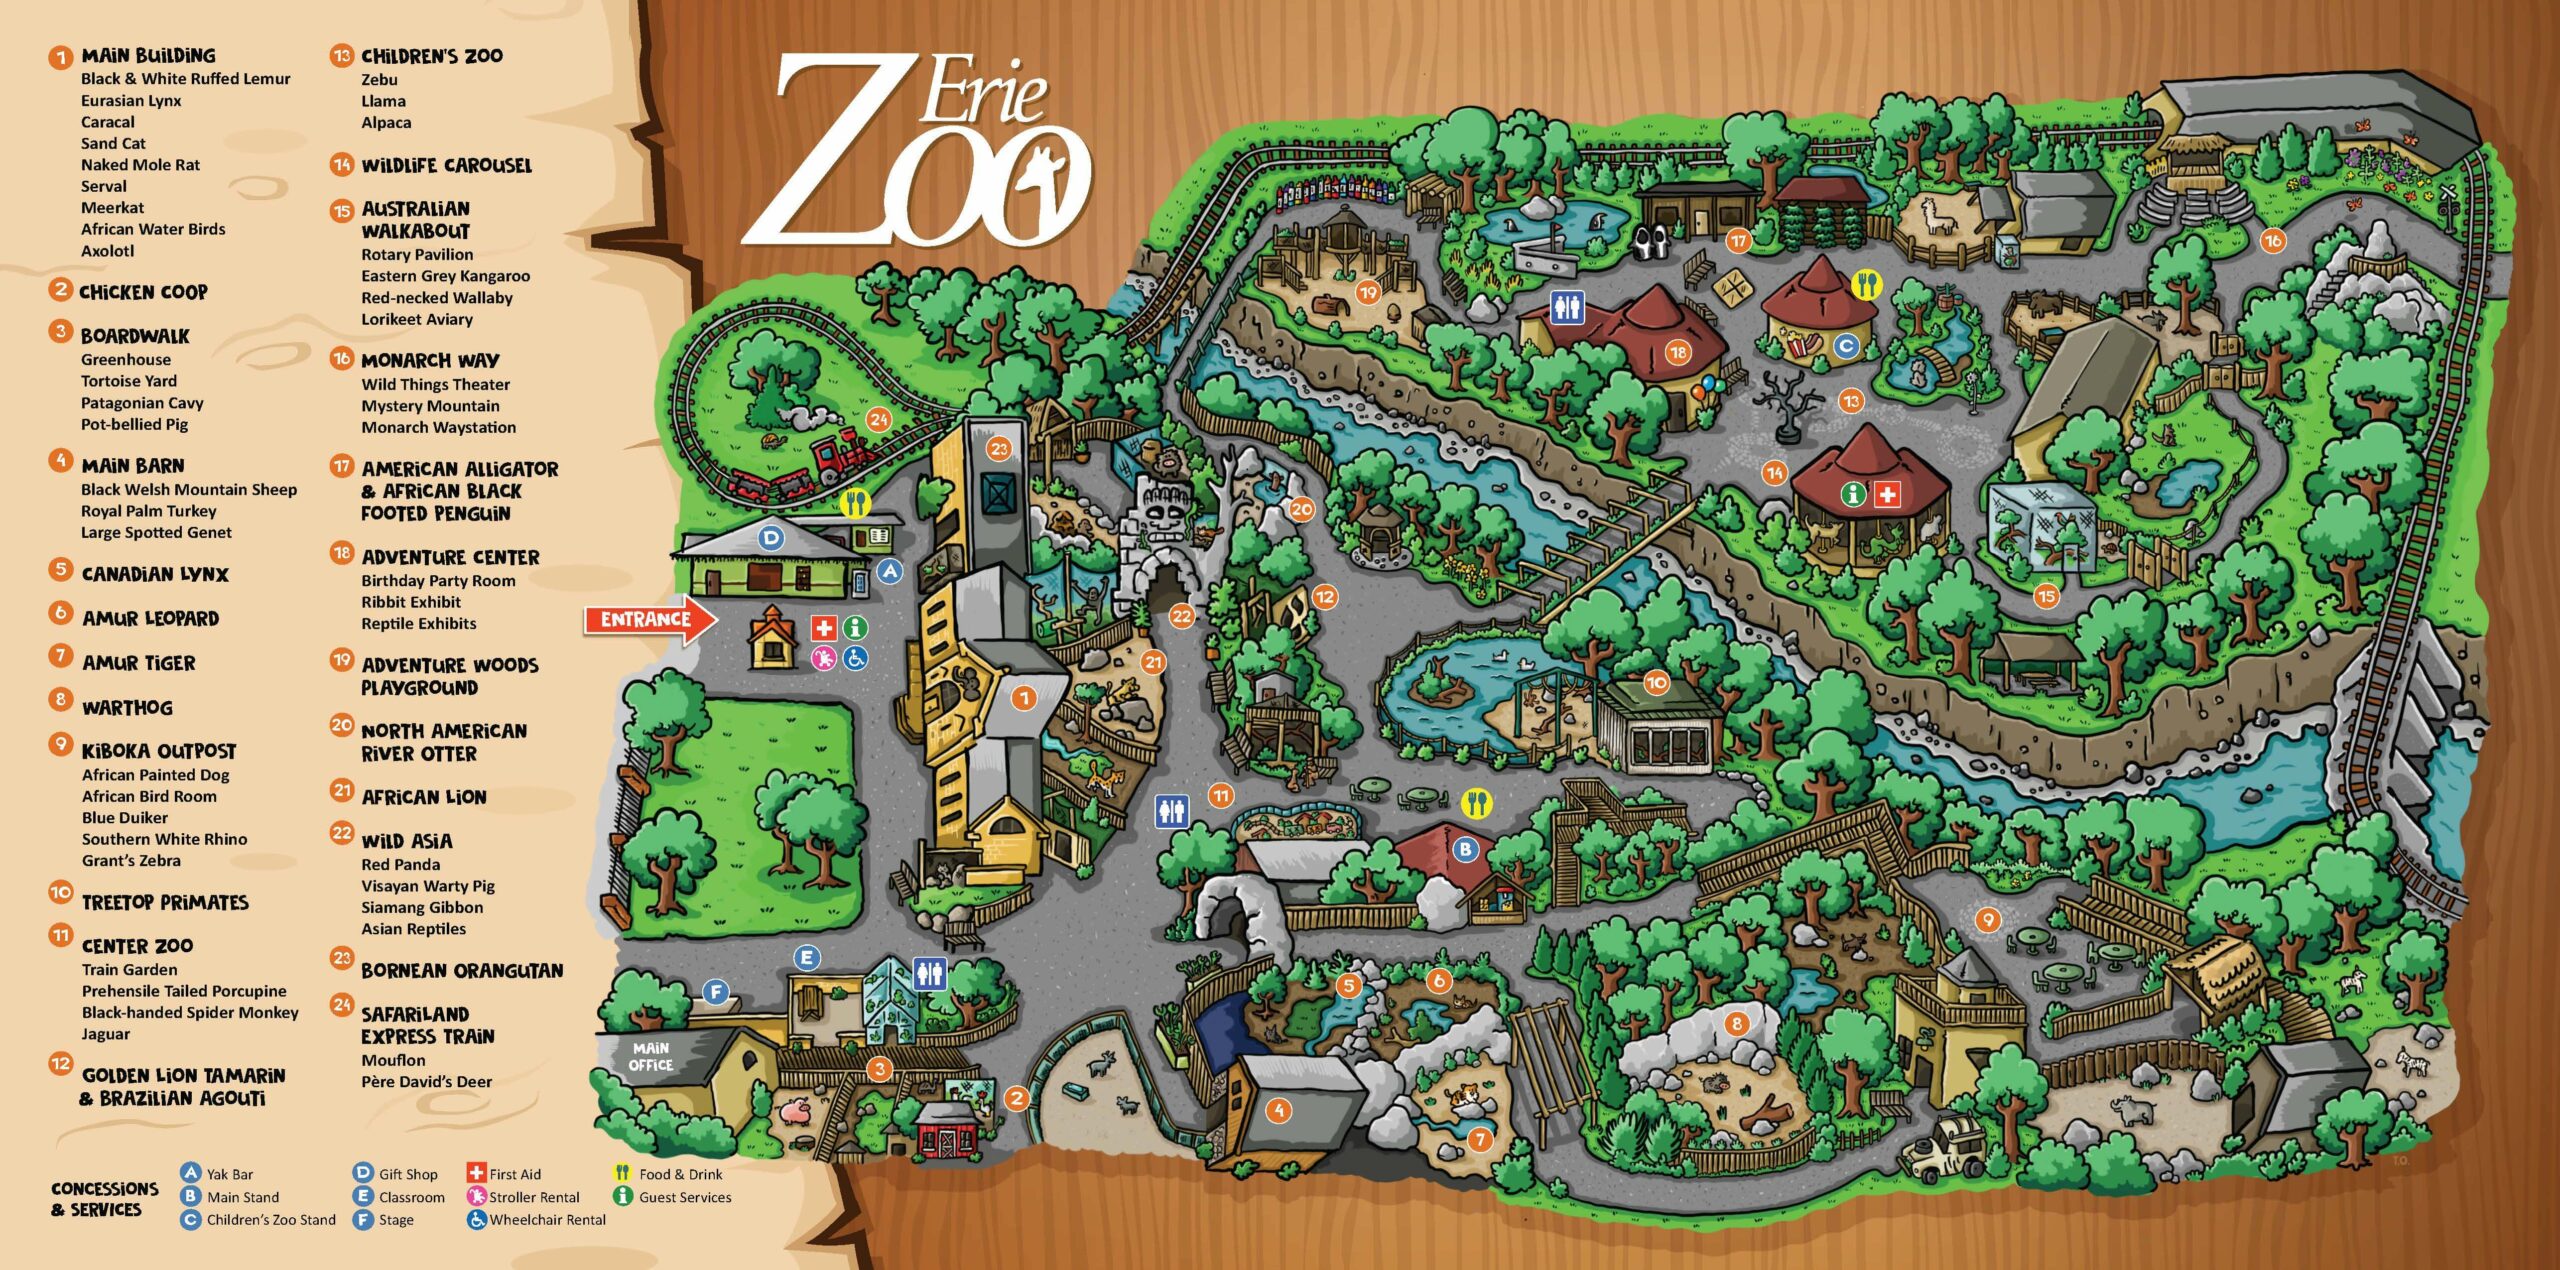 Erie Zoo Map